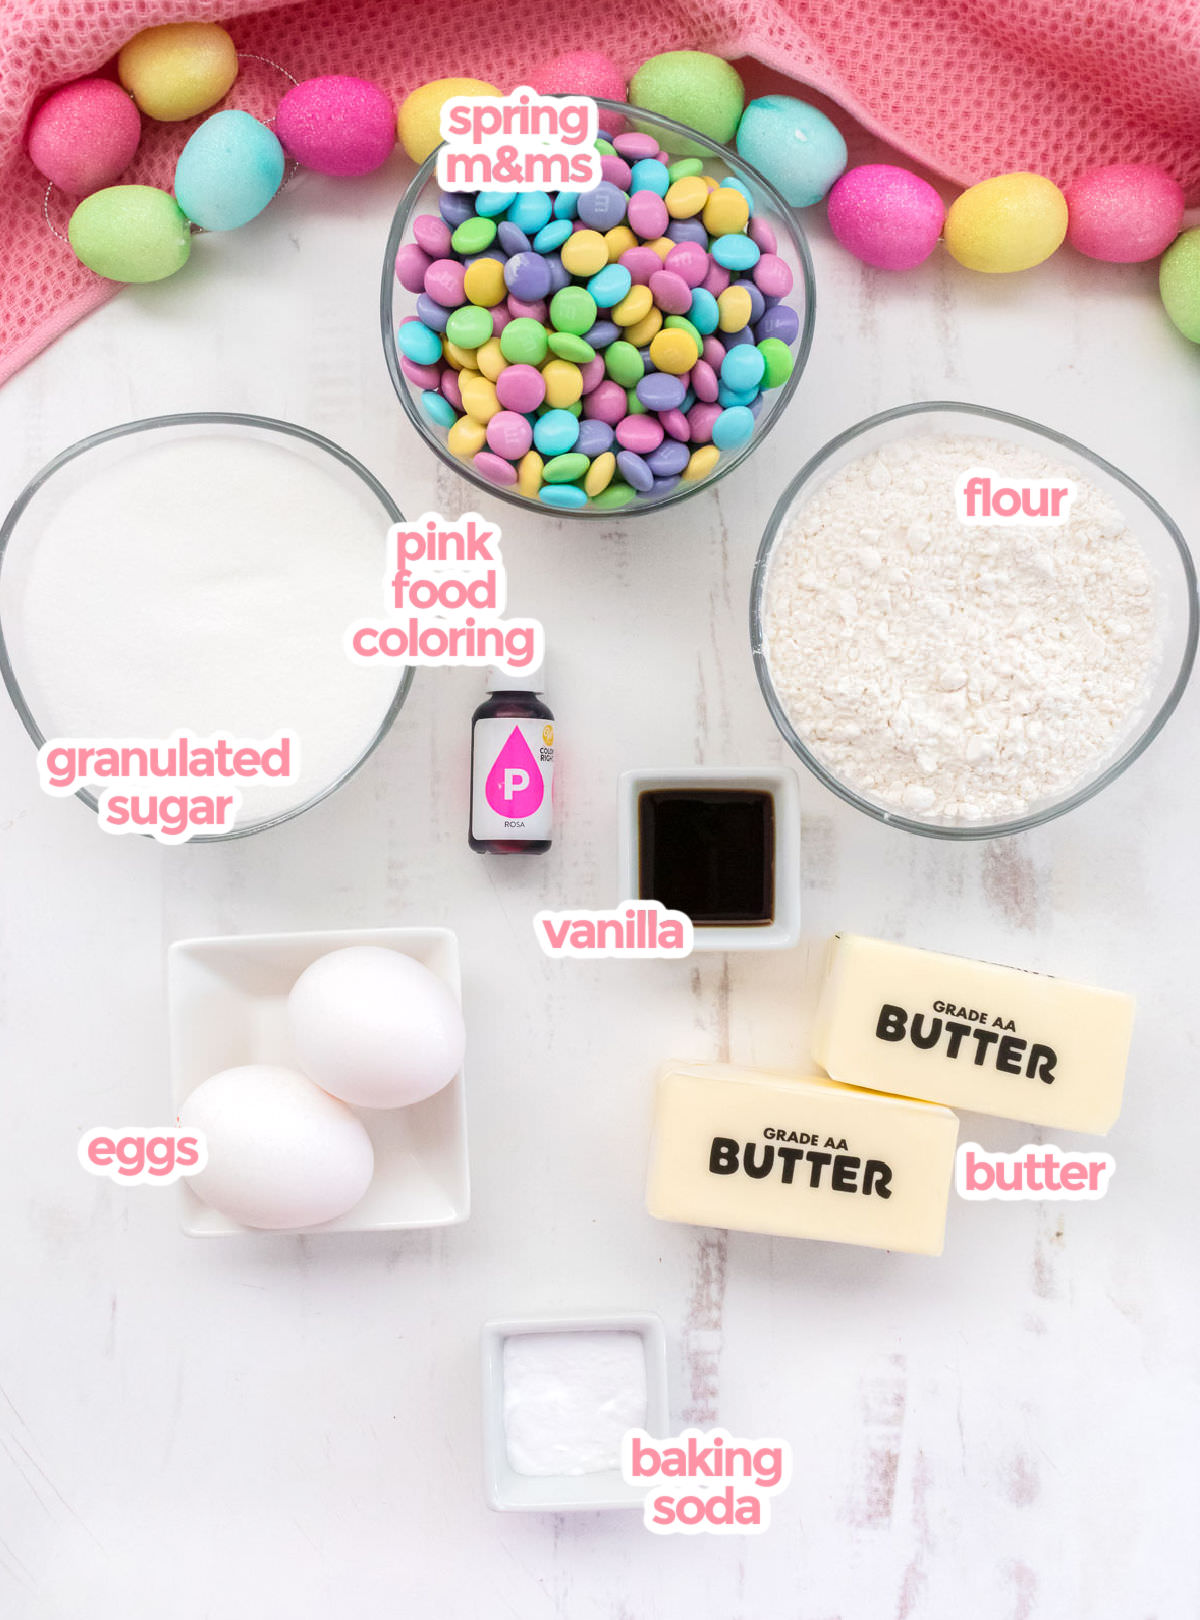 The ingredients you will need to make Easter M&M Sugar Cookies including  butter, sugar, eggs, vanilla, baking soda, flour, pink food coloring and Spring M&M's.